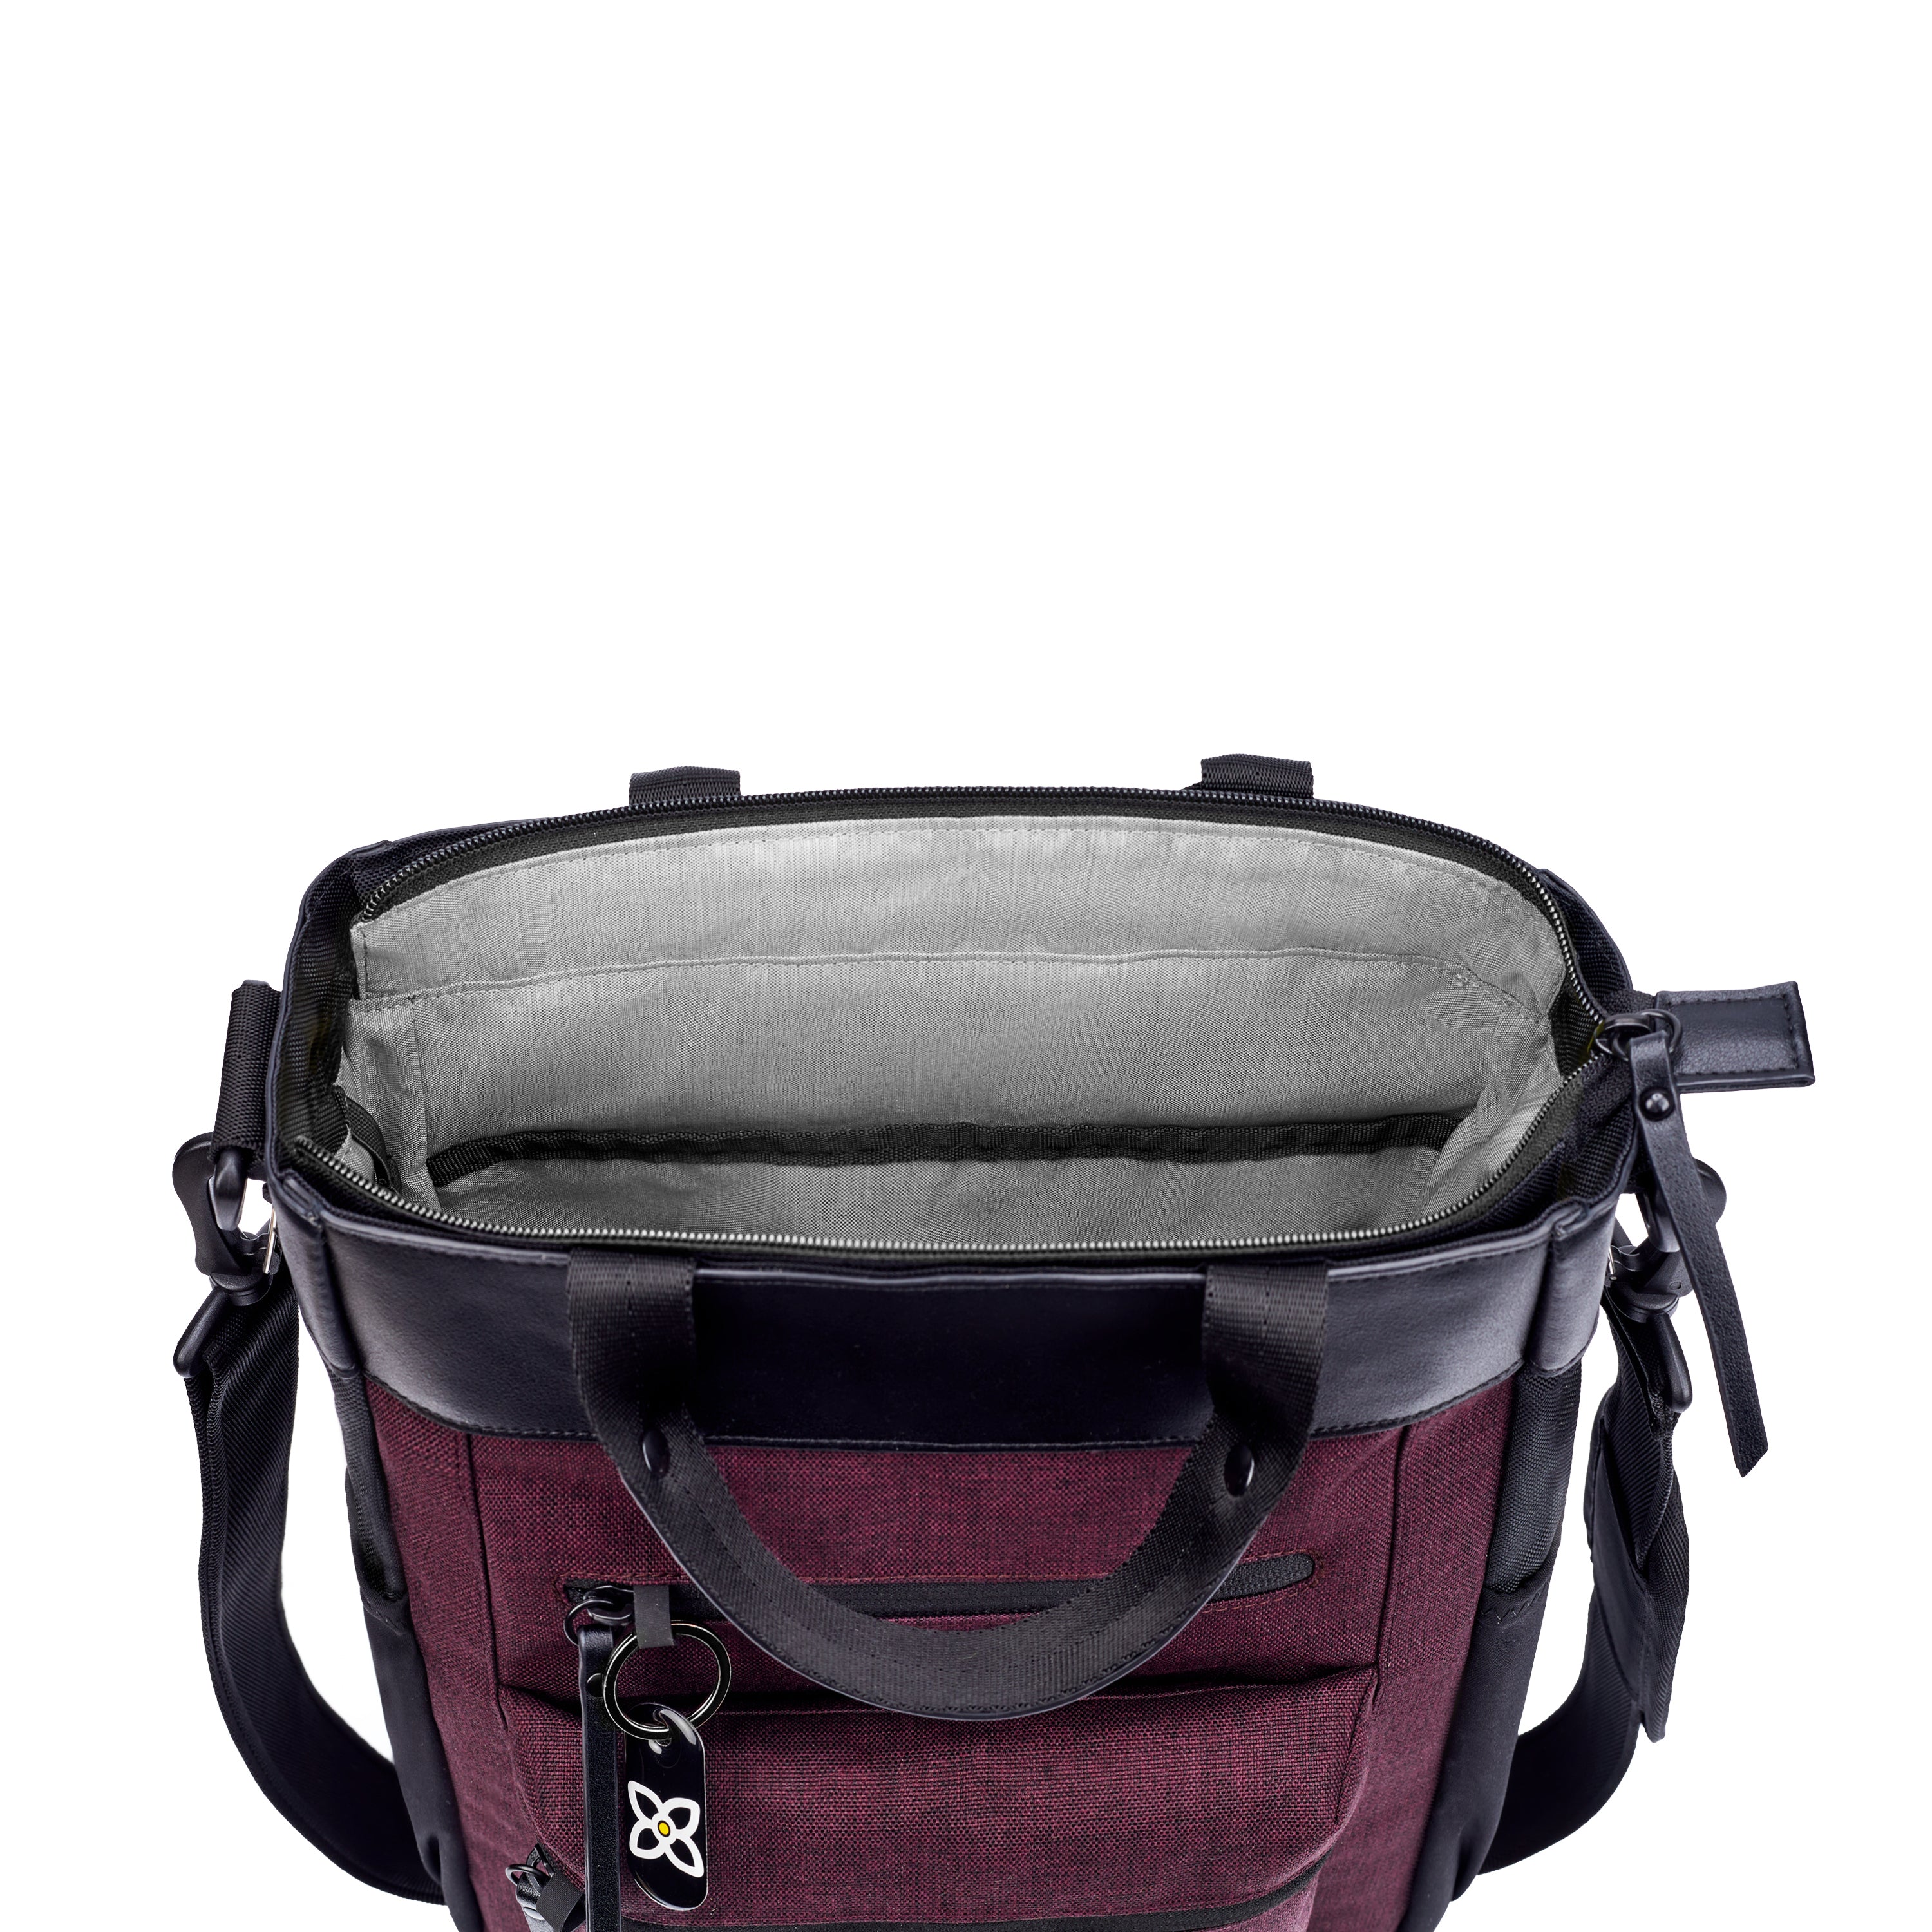 Top view of Sherpani’s Anti-Theft bag, the Soleil AT in Merlot, with vegan leather accents in blag. The mouth of the bag is open to reveal a lime green interior and a padded laptop sleeve. 